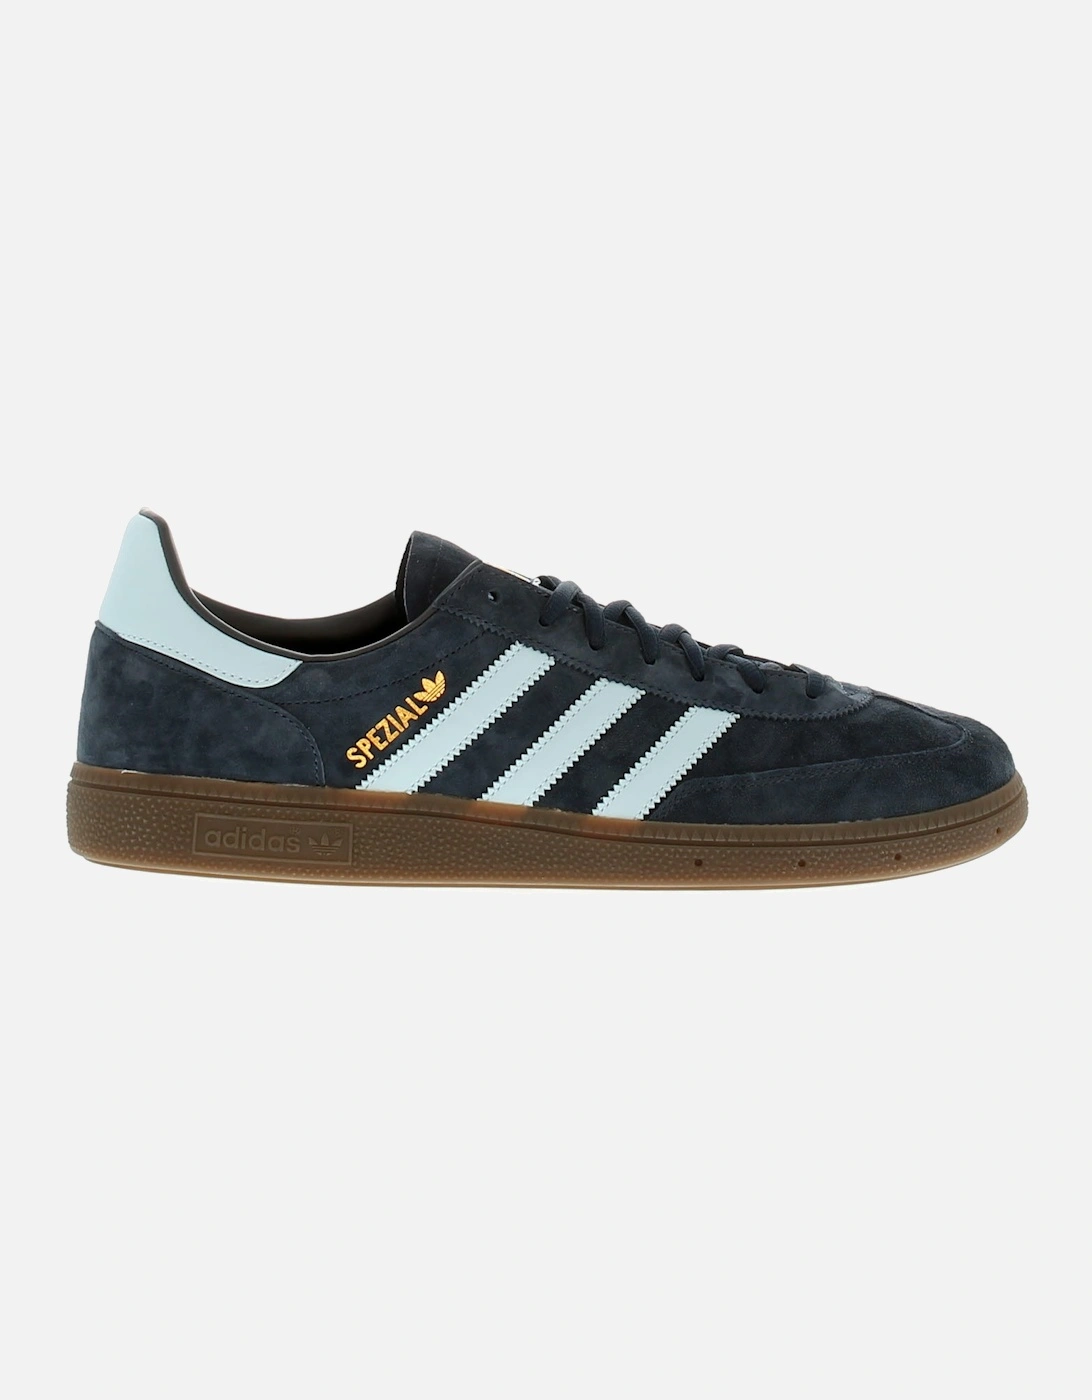 Mens Trainers Handball Spezial Leather Lace Up navy light blue